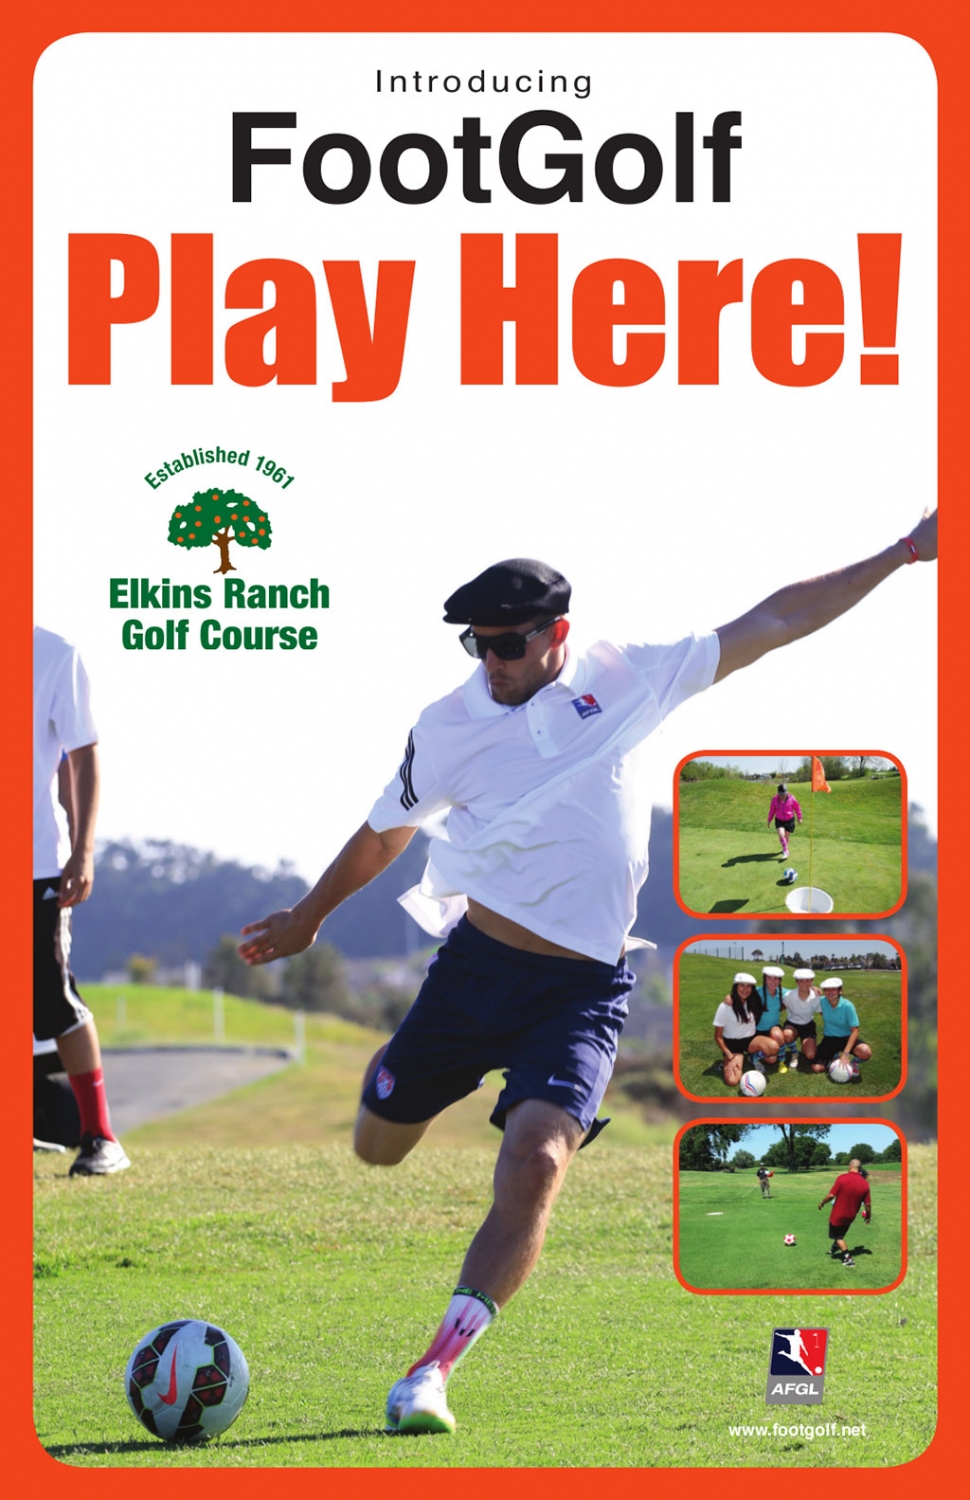 Elkins Ranch is happy to announce the Grand Opening of FootGolf on April 4th, 2015.  Footgolf is a combination of soccer and golf.  The game is played with a regulation soccer ball on the actual golf course on shortened holes with 21 inch diameter cups.  Elkins Ranch FootGolf course was meticulously designed by Superintendent, Jeff Naas and Head Golf Professional, Colby Hartje.  They put a great deal of thought and detail into the design to ensure player satisfaction.  Elkins Ranch would love to invite you out to our Grand Opening tournament on Saturday, April 4th, 2015.  Please call 805-524-1121 for more information.